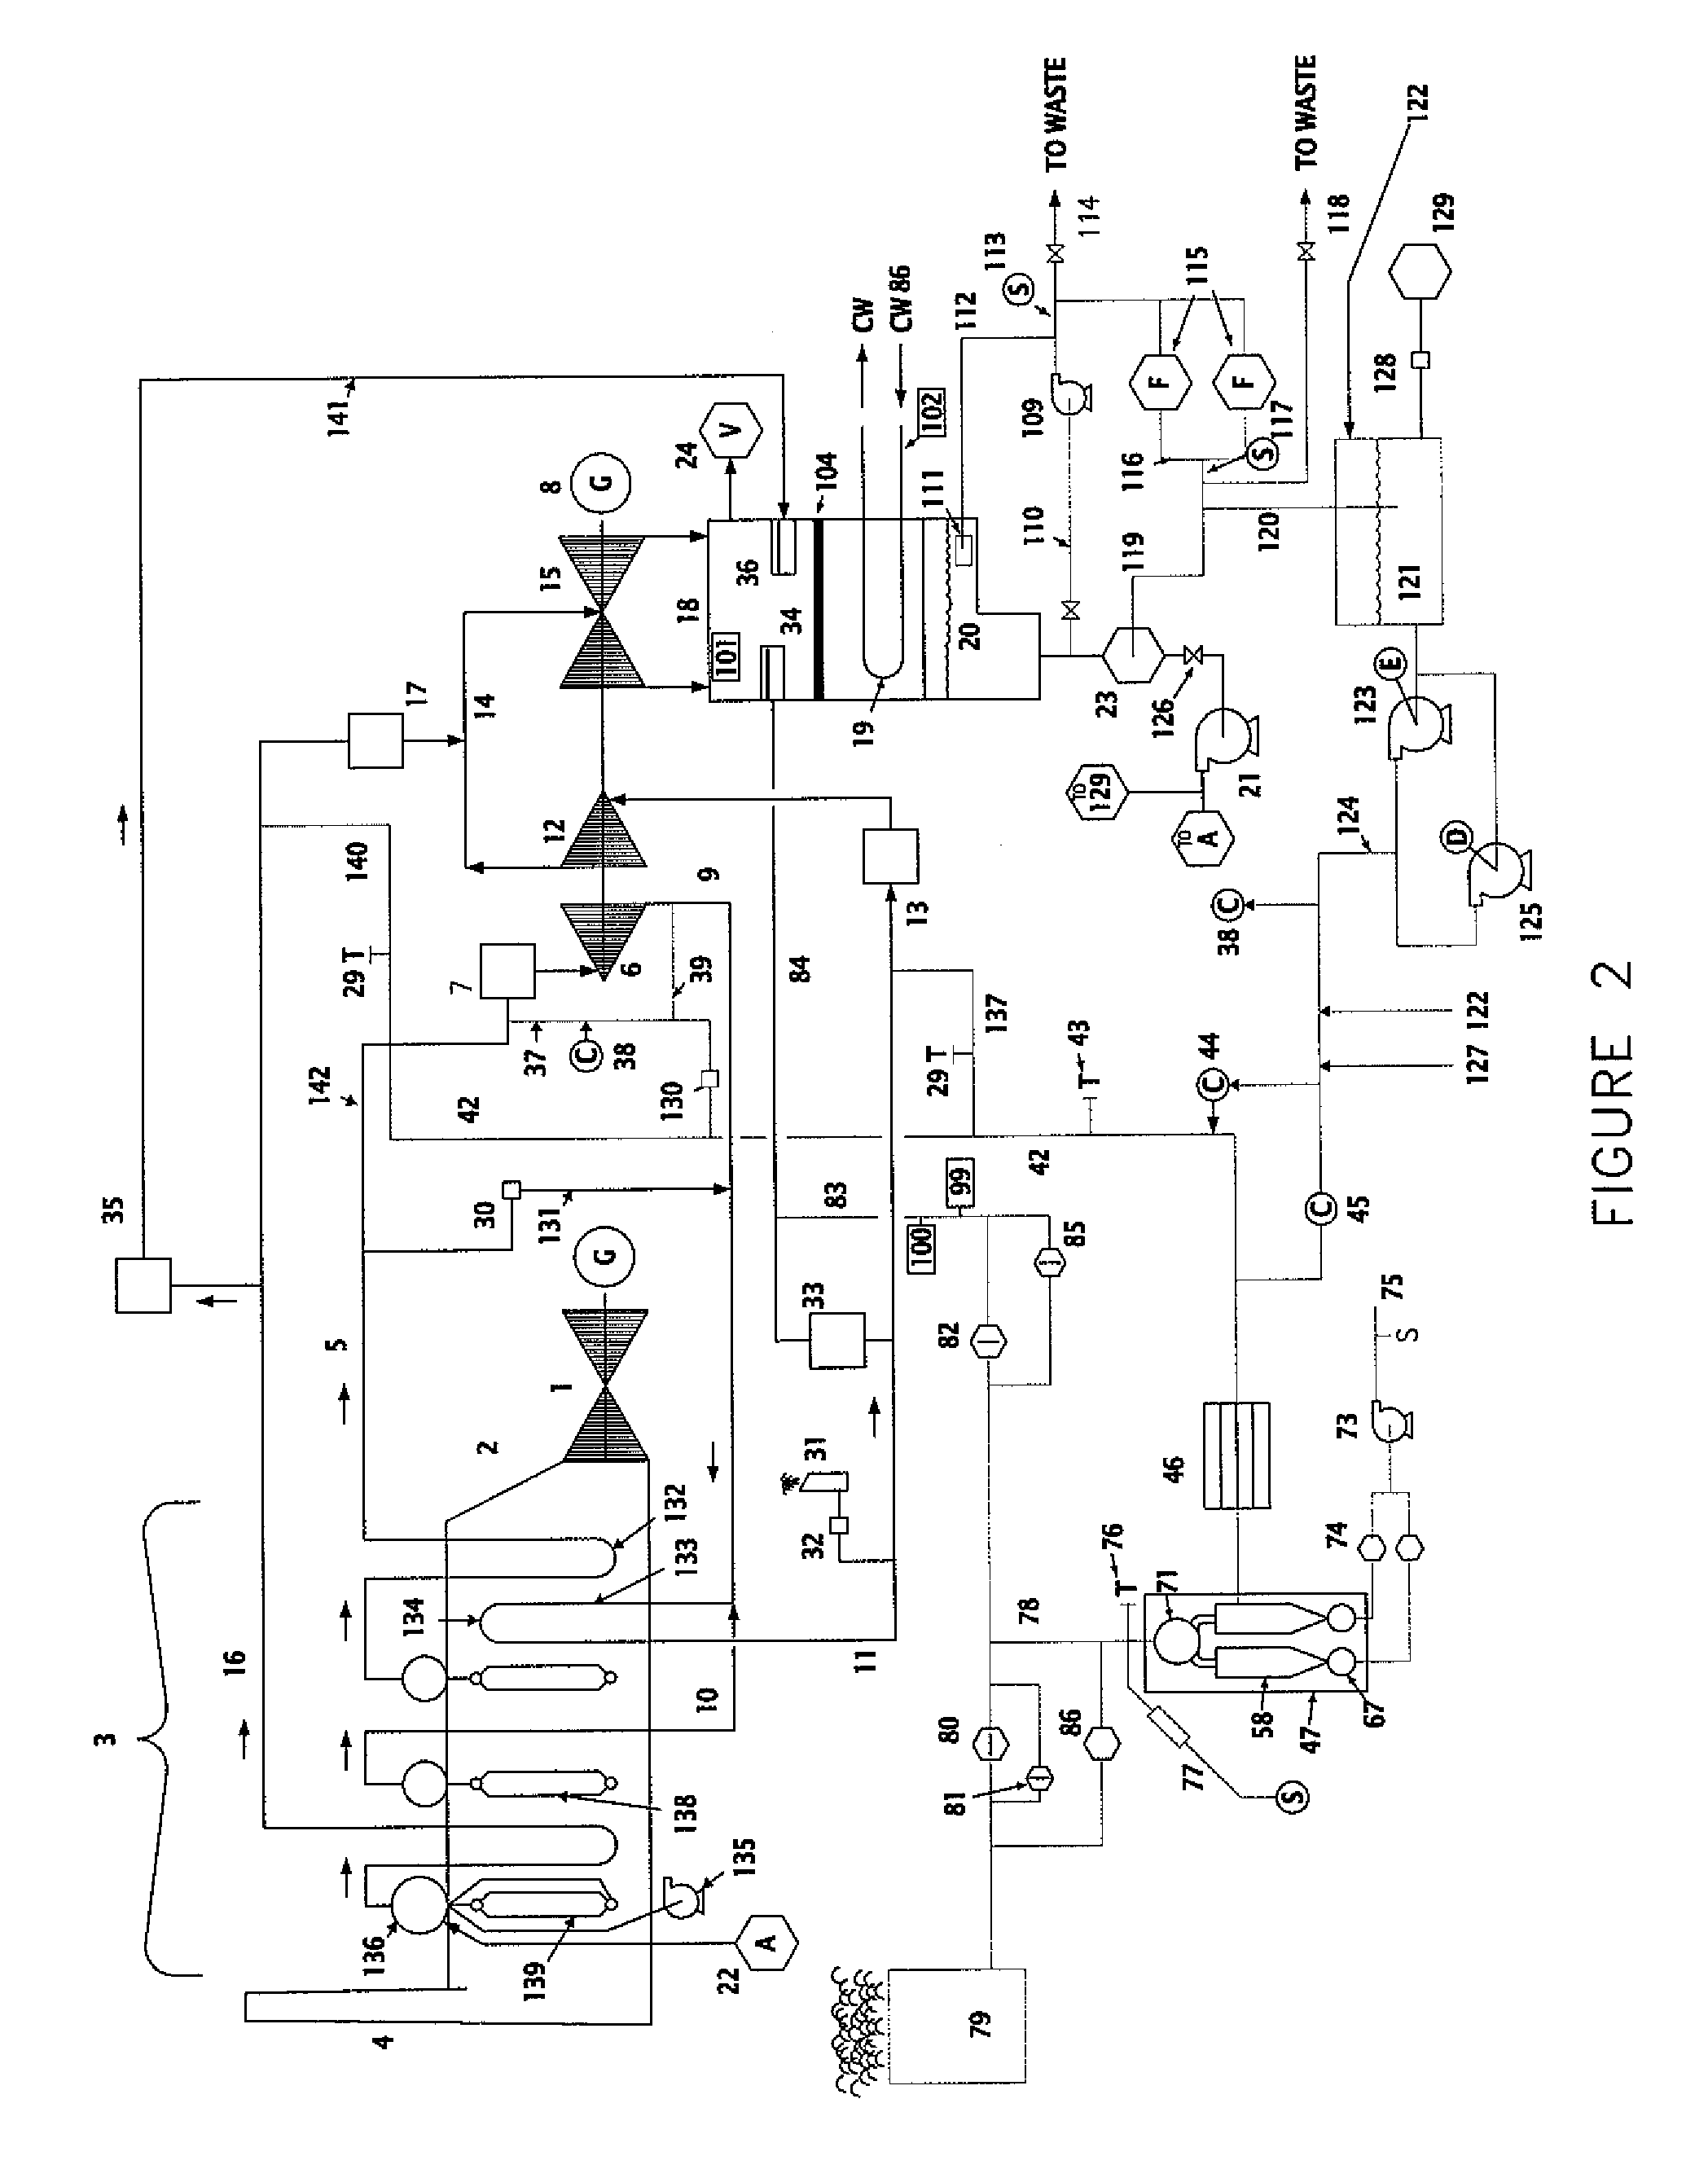 Method and apparatus for commissioning power plants